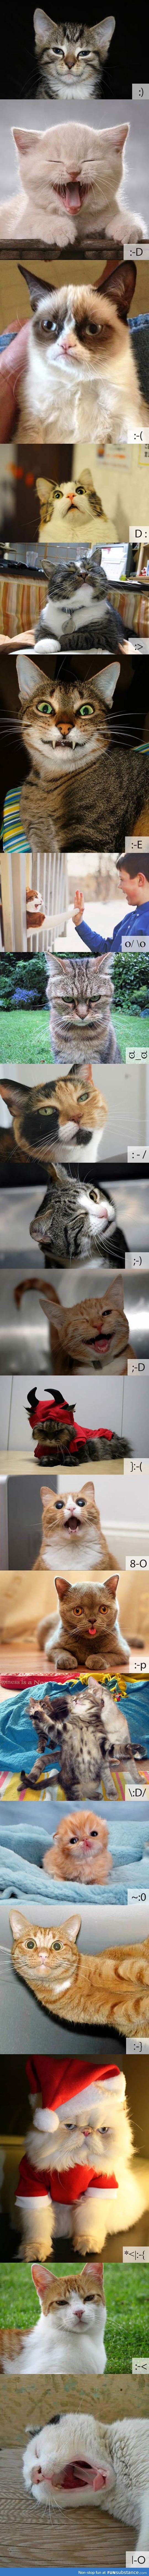 If cats were emoticons